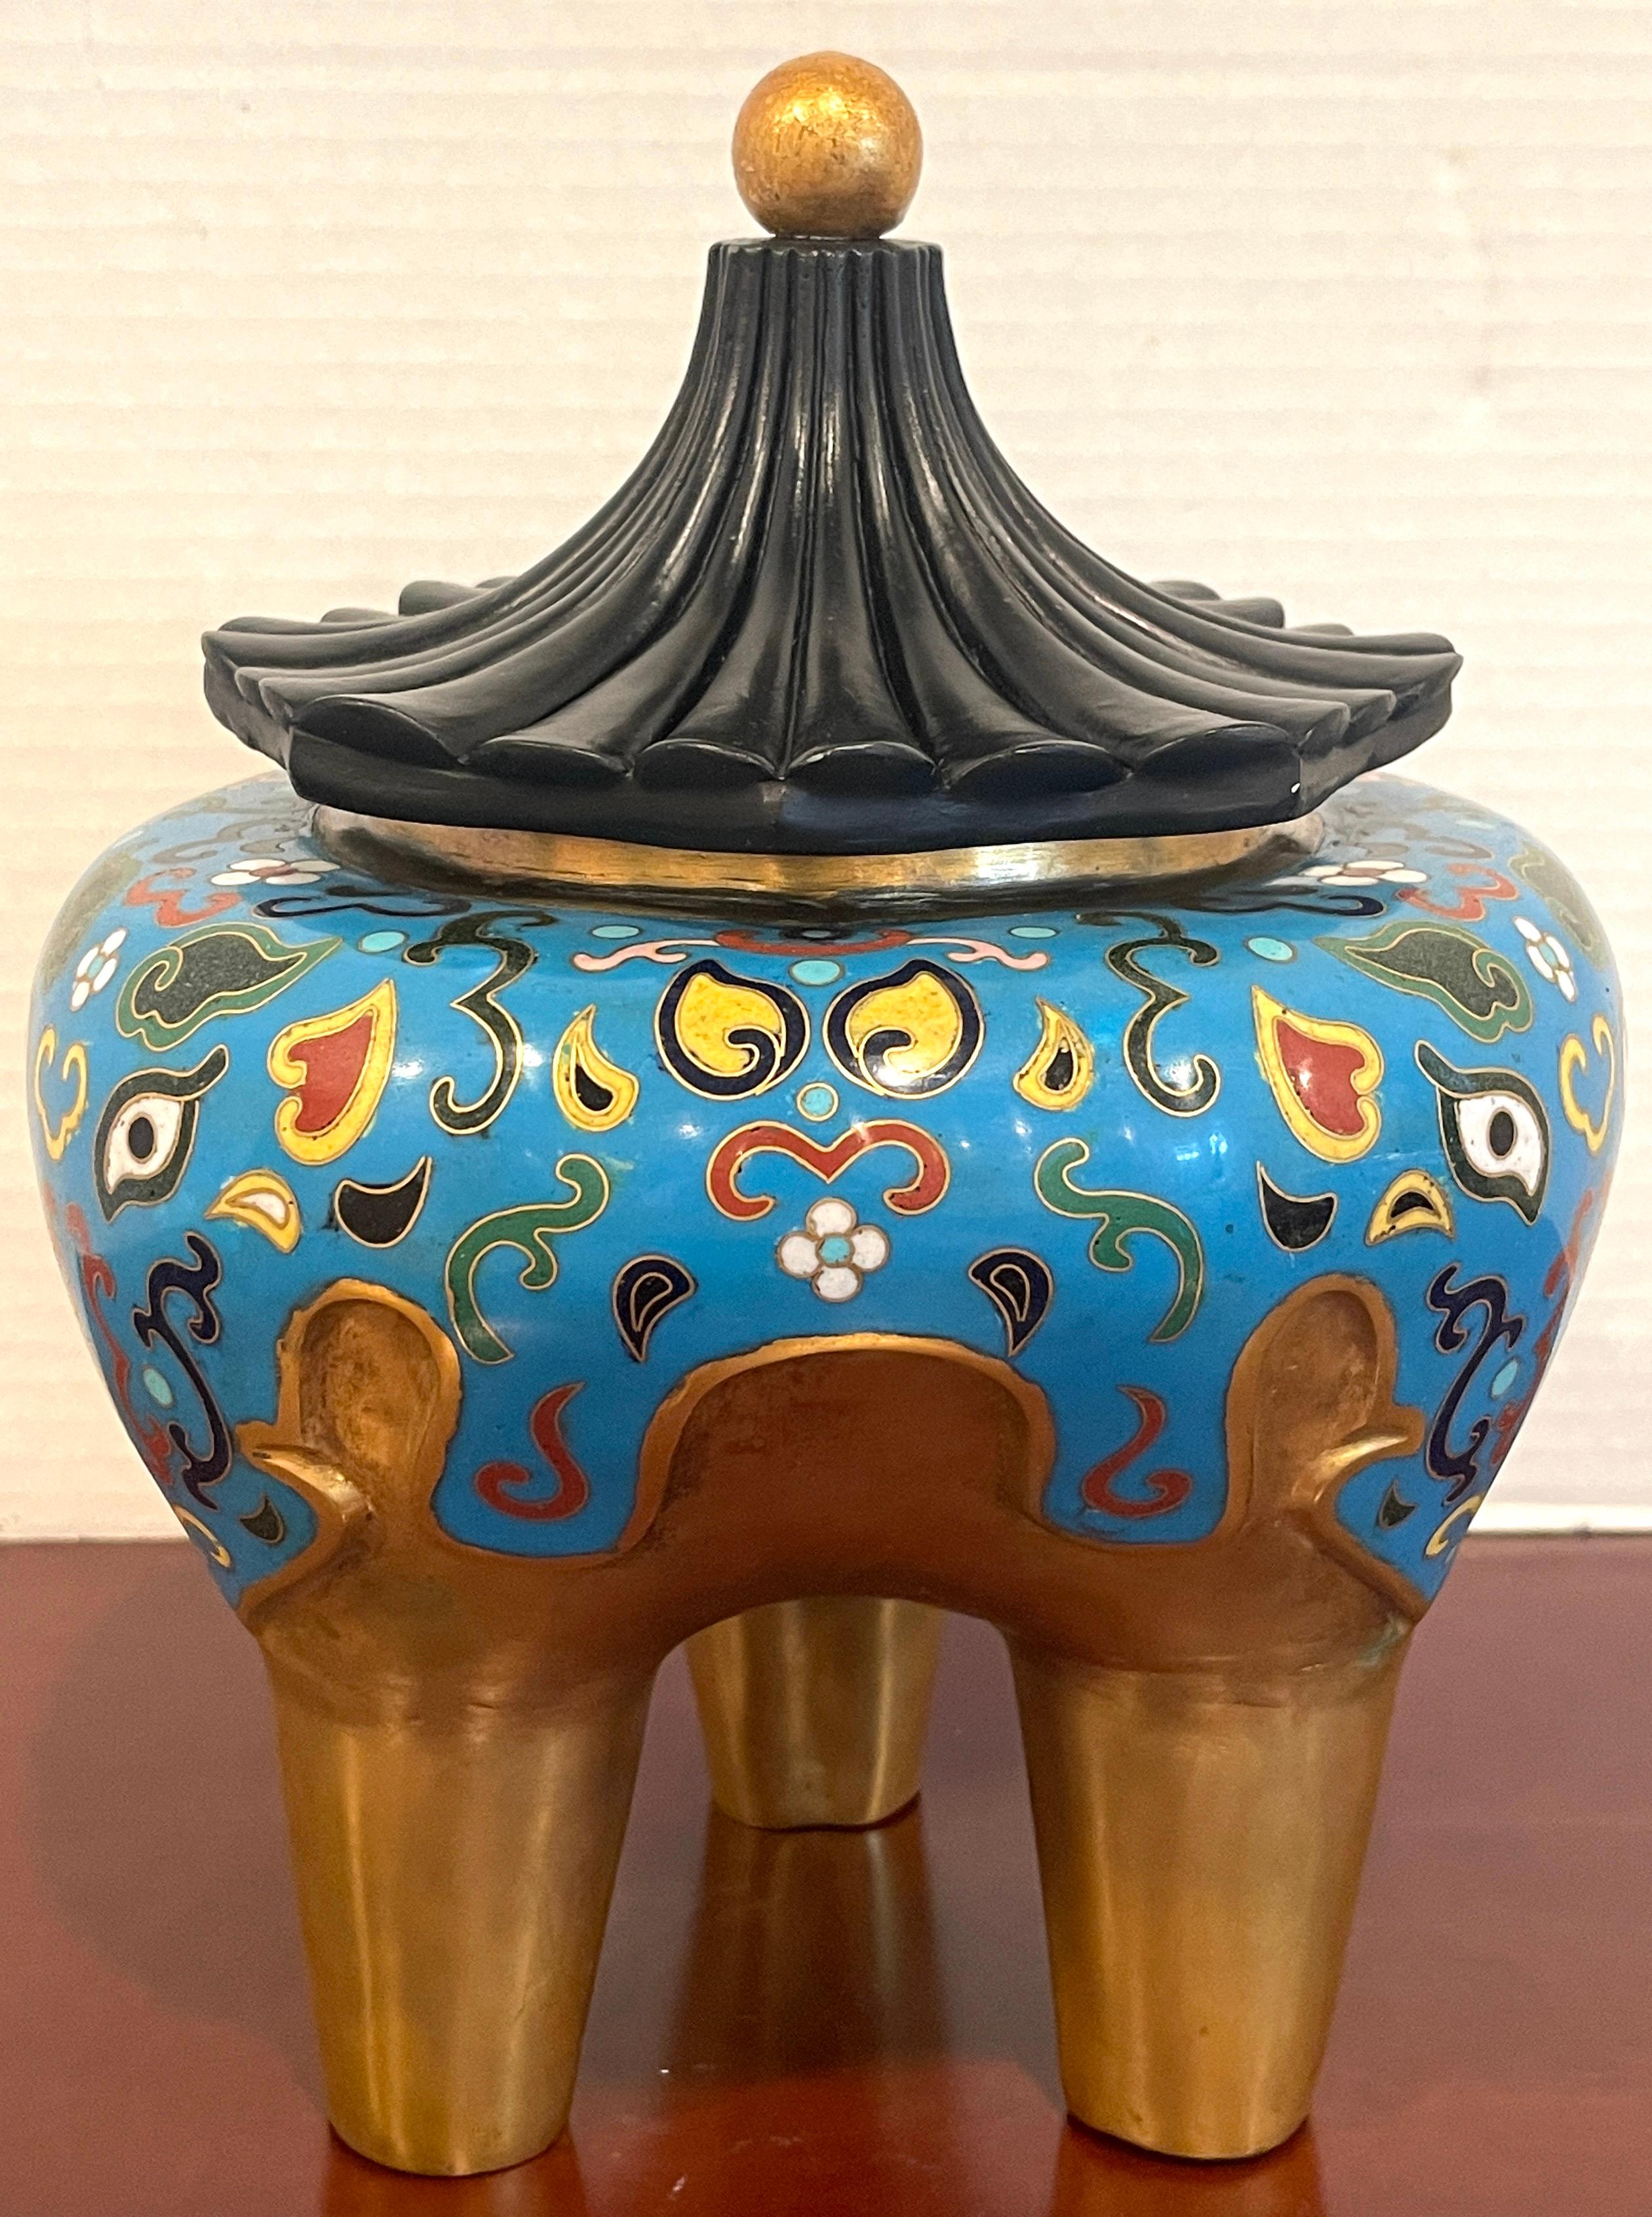 19th century Chinese Archaic style Cloisonné & Lacquer Elephant Motif Censor 
With Associated later lacquer & bronze pagoda lid, resting on a gilt bronze Cloisonné elephant motif three legged censor. Unmarked.
11